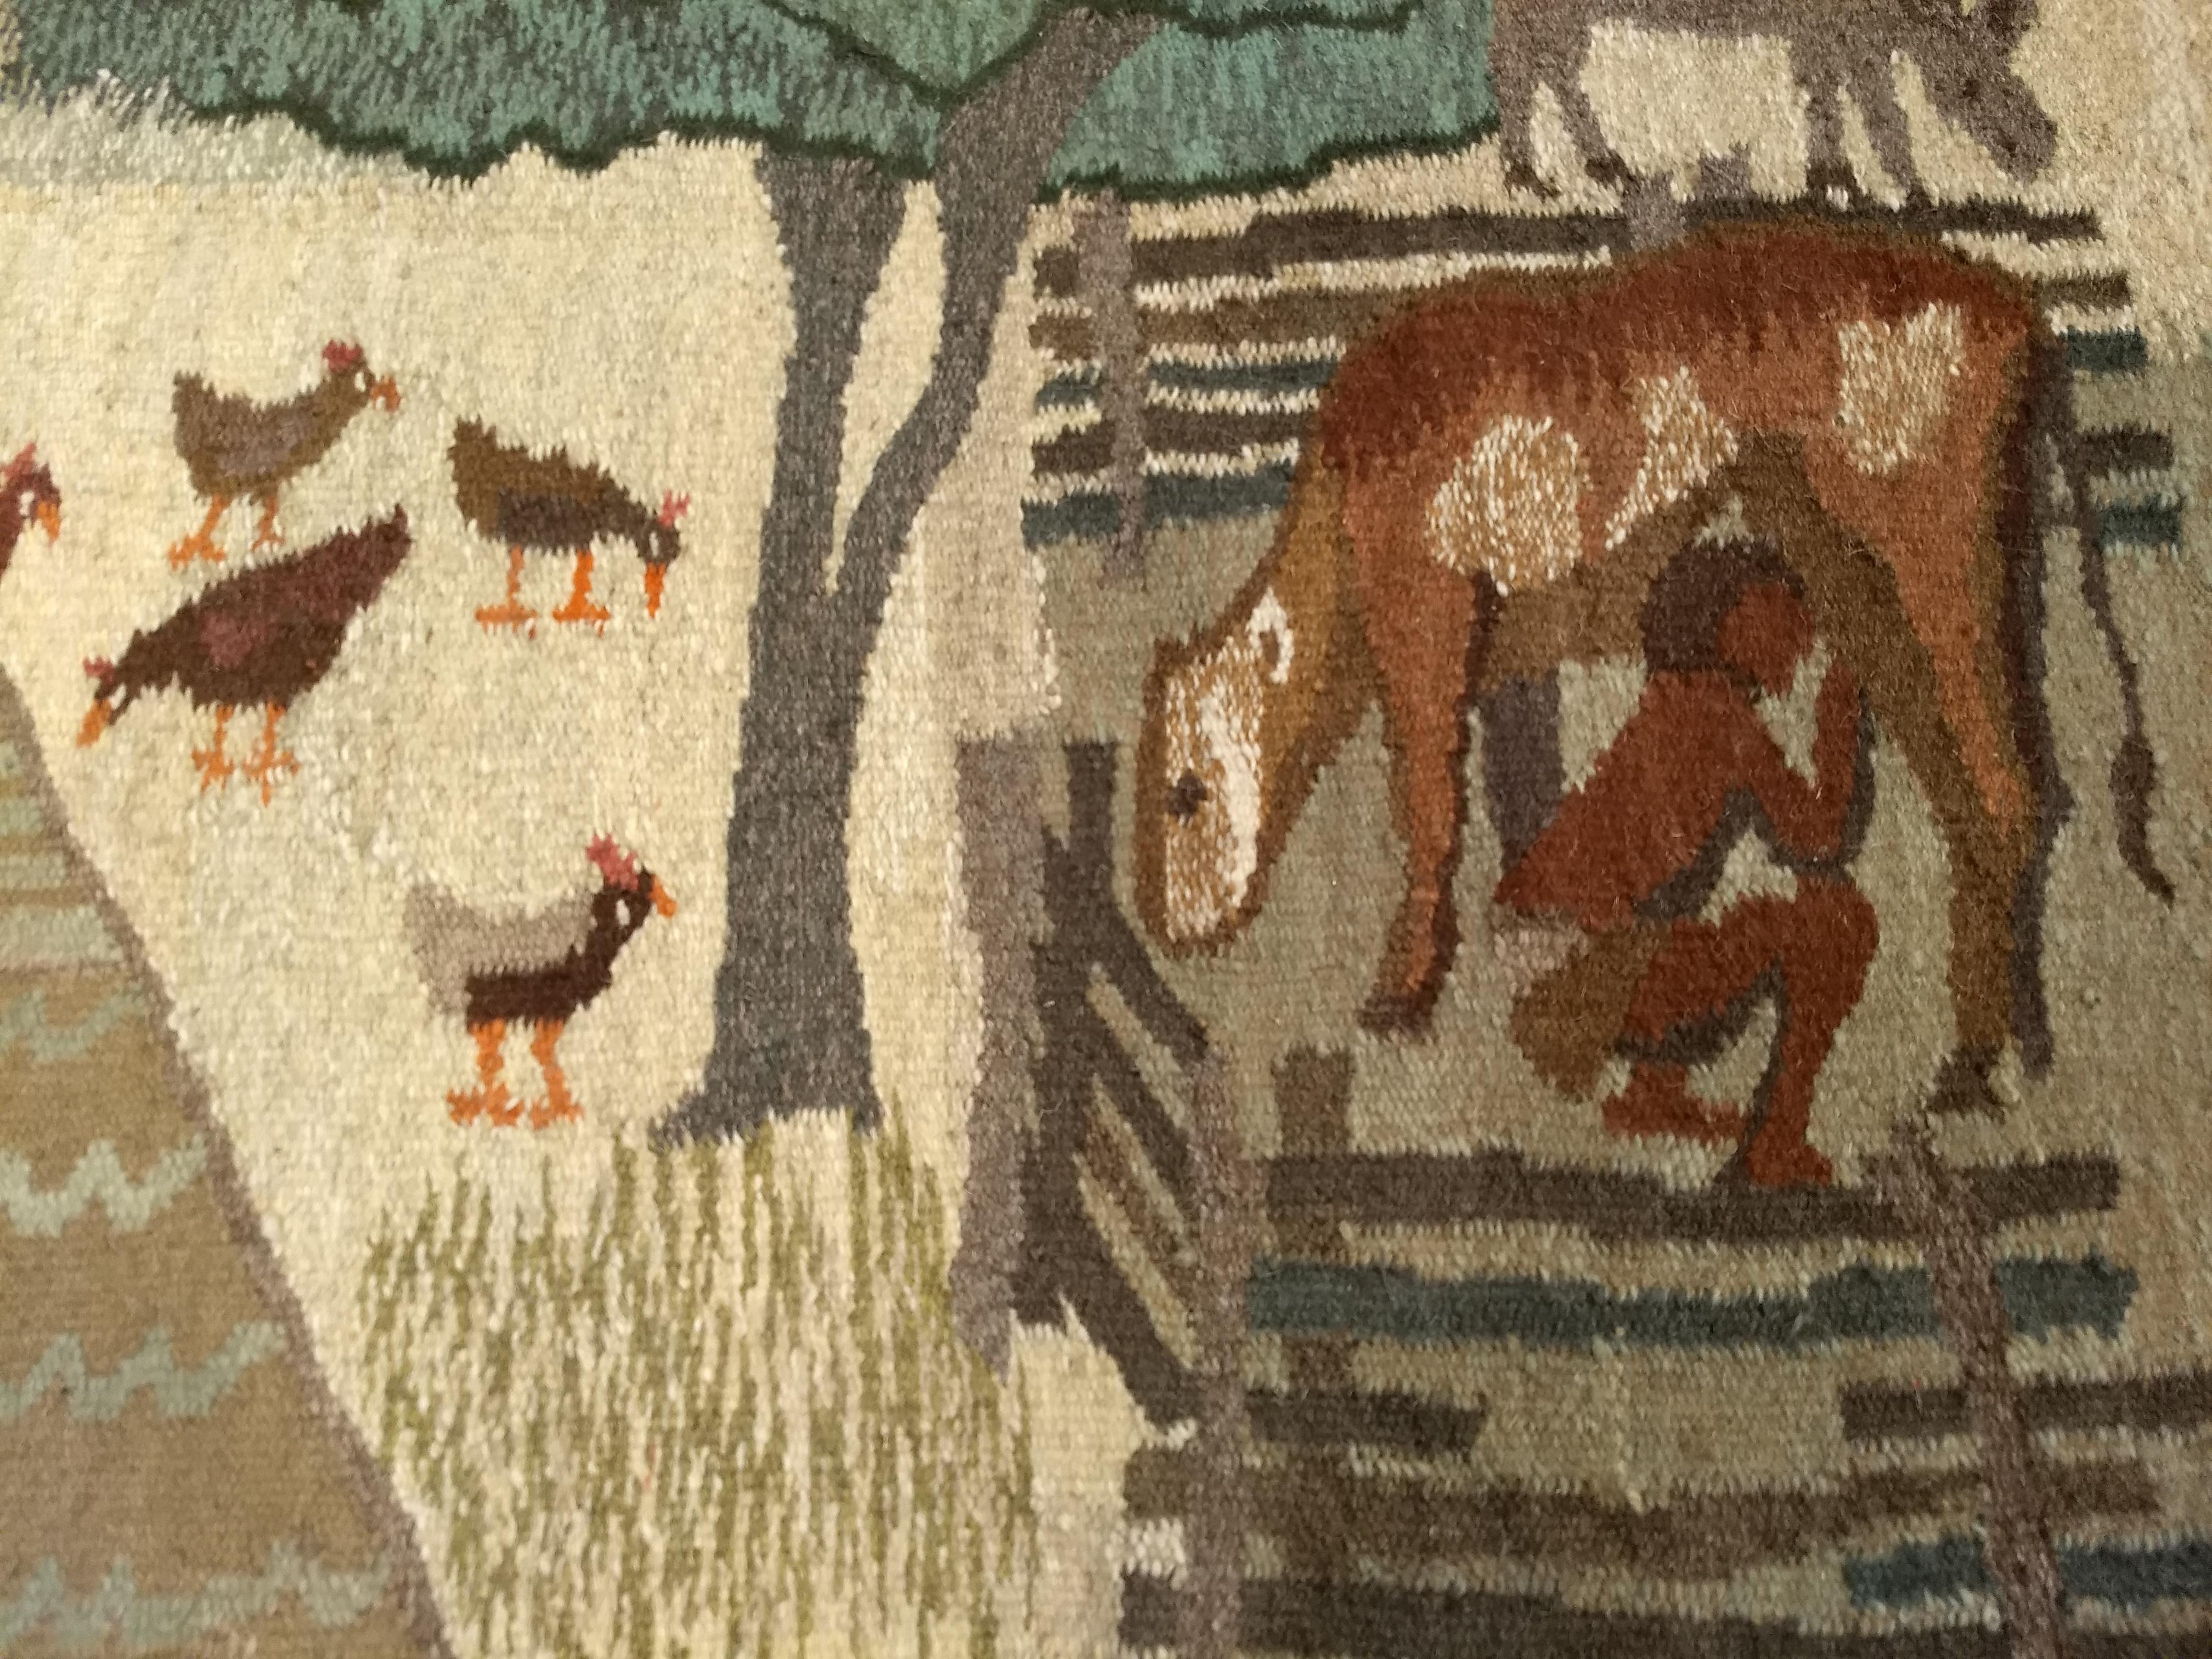 Vegetable Dyed Vintage Hand Woven African Tapestry Depicting Life Scenes Around a Village For Sale